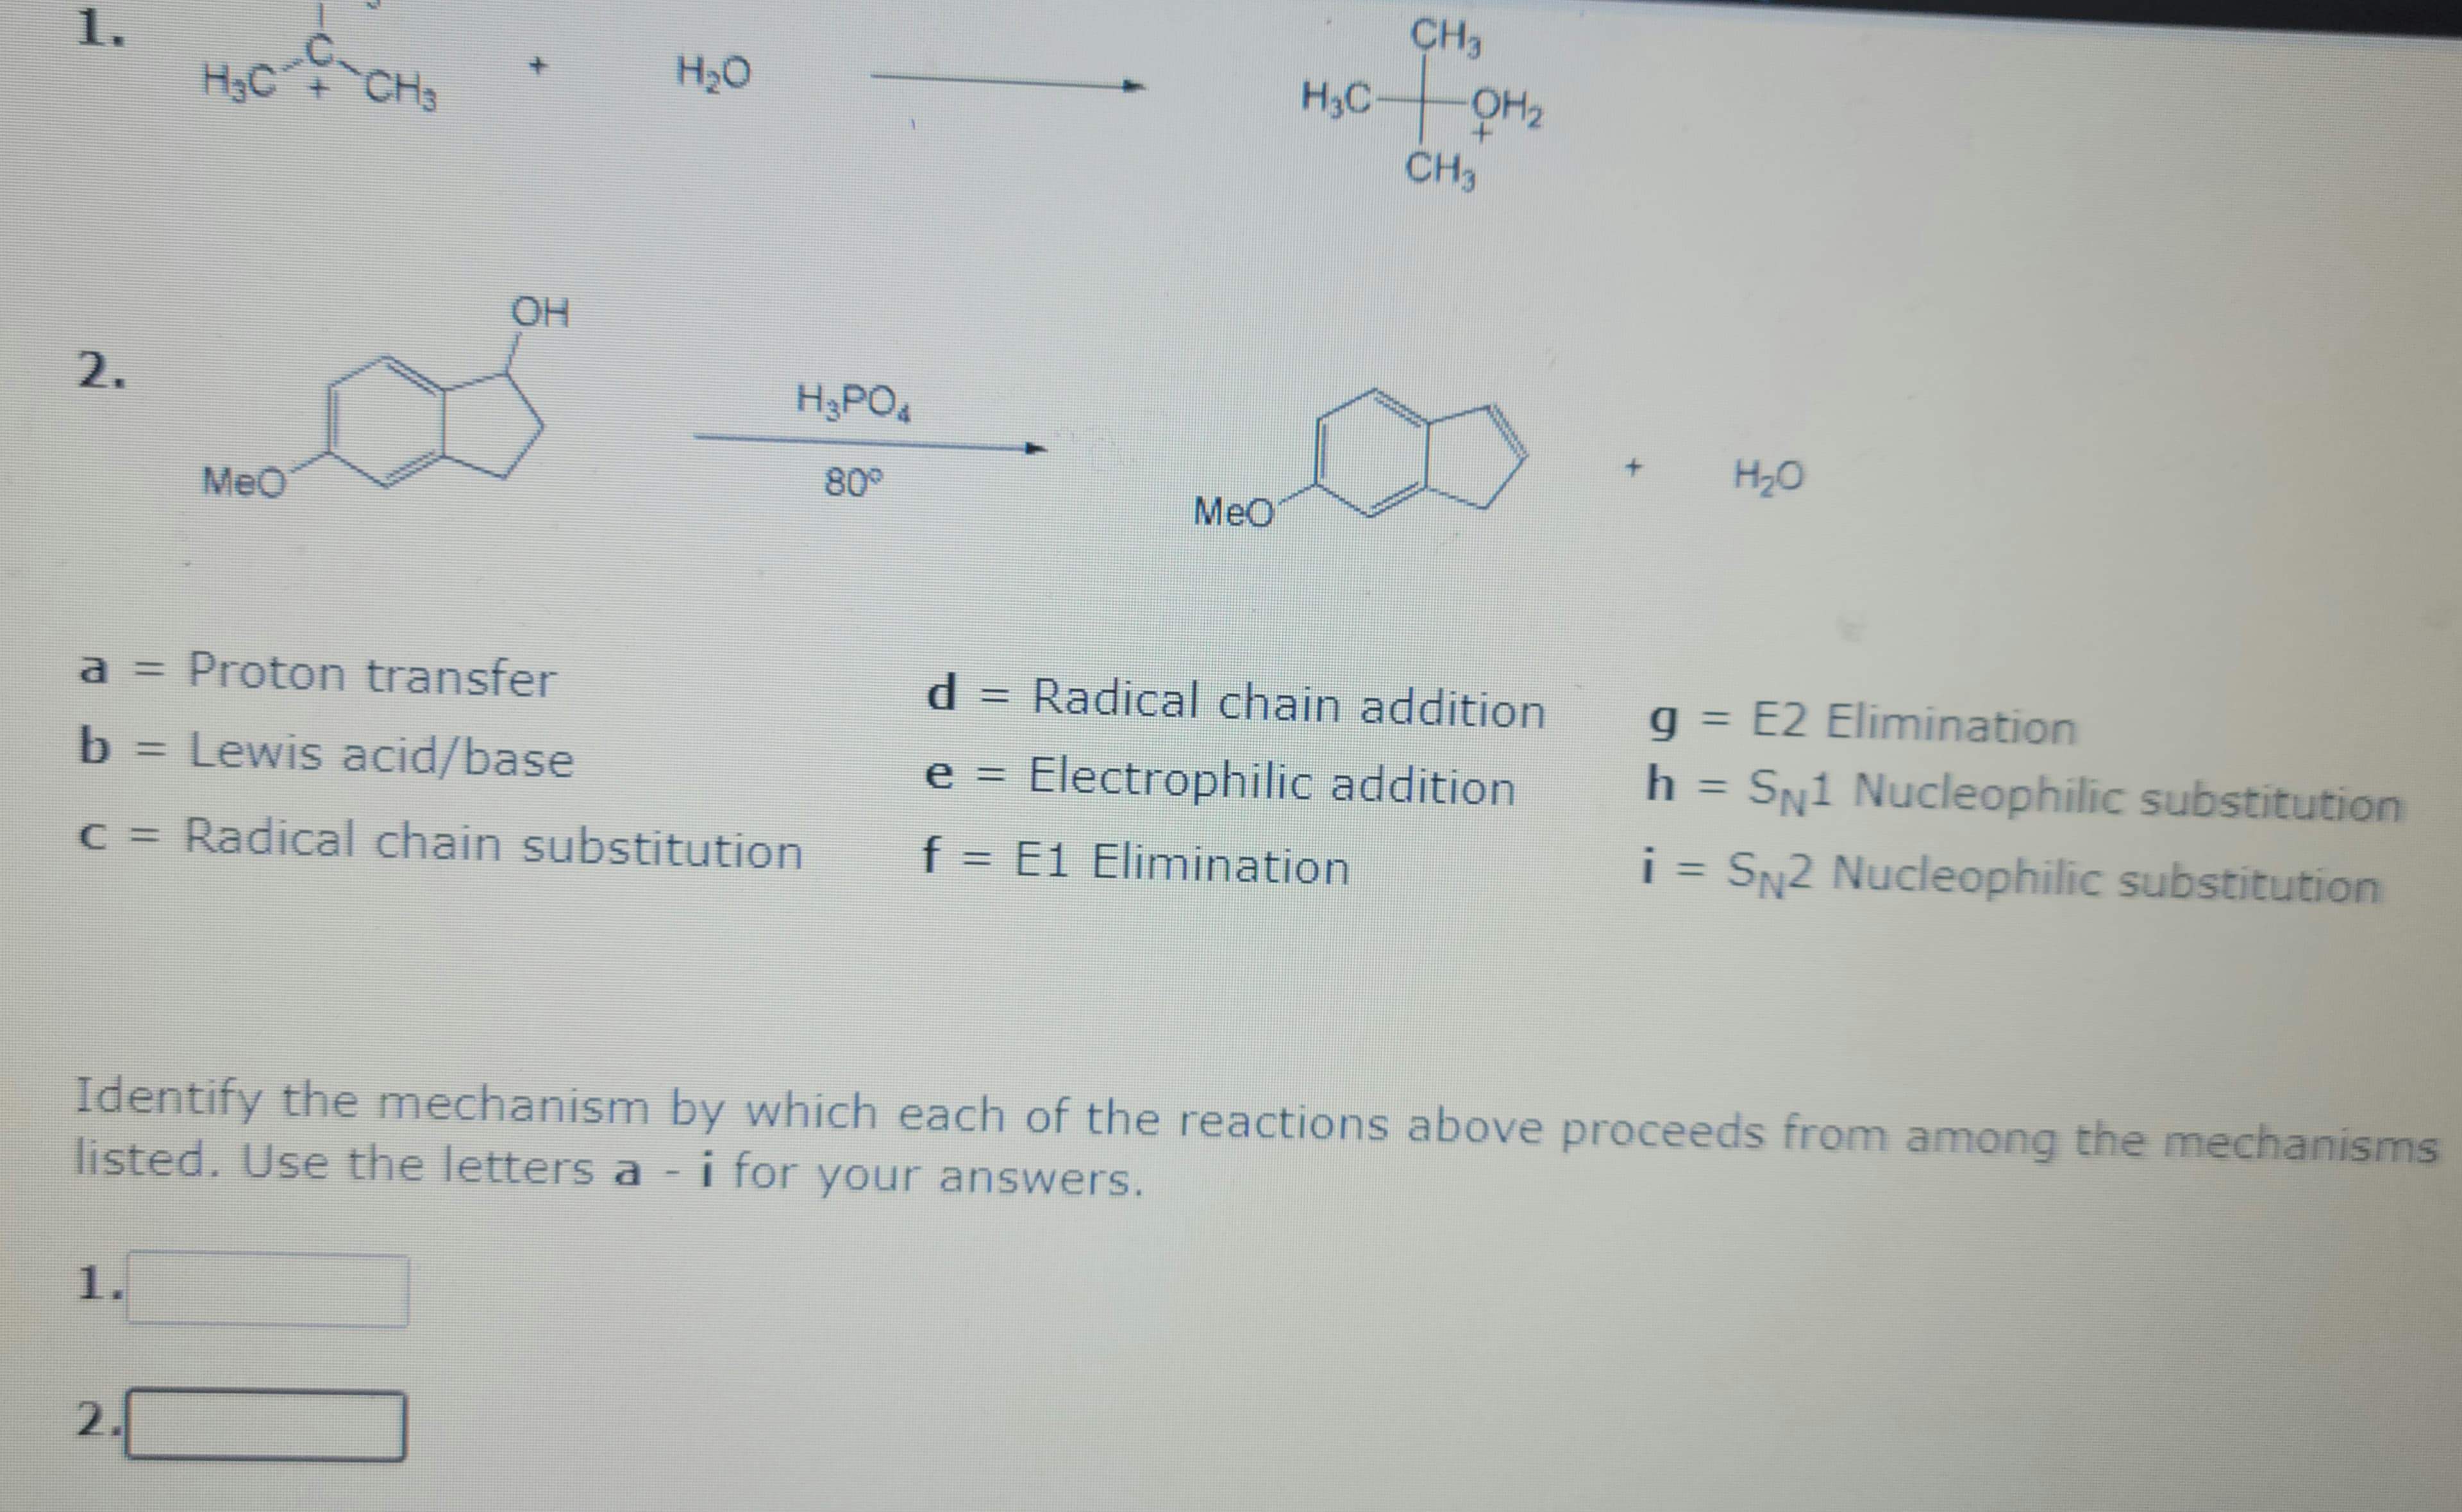 1.
2.
H₂C
1.
MeO
2.
-CH3
H₂O
a = Proton transfer
b = Lewis acid/base
c = Radical chain substitution
H3PO4
80°
MeO
CH3
H₂COM₂
CH3
d = Radical chain addition
e = Electrophilic addition
f = E1 Elimination
H₂O
Identify the mechanism by which each of the reactions above proceeds from among the mechanisms
listed. Use the letters a - i for your answers.
g = E2 Elimination
h = SN1 Nucleophilic substitution
i = SN2 Nucleophilic substitution